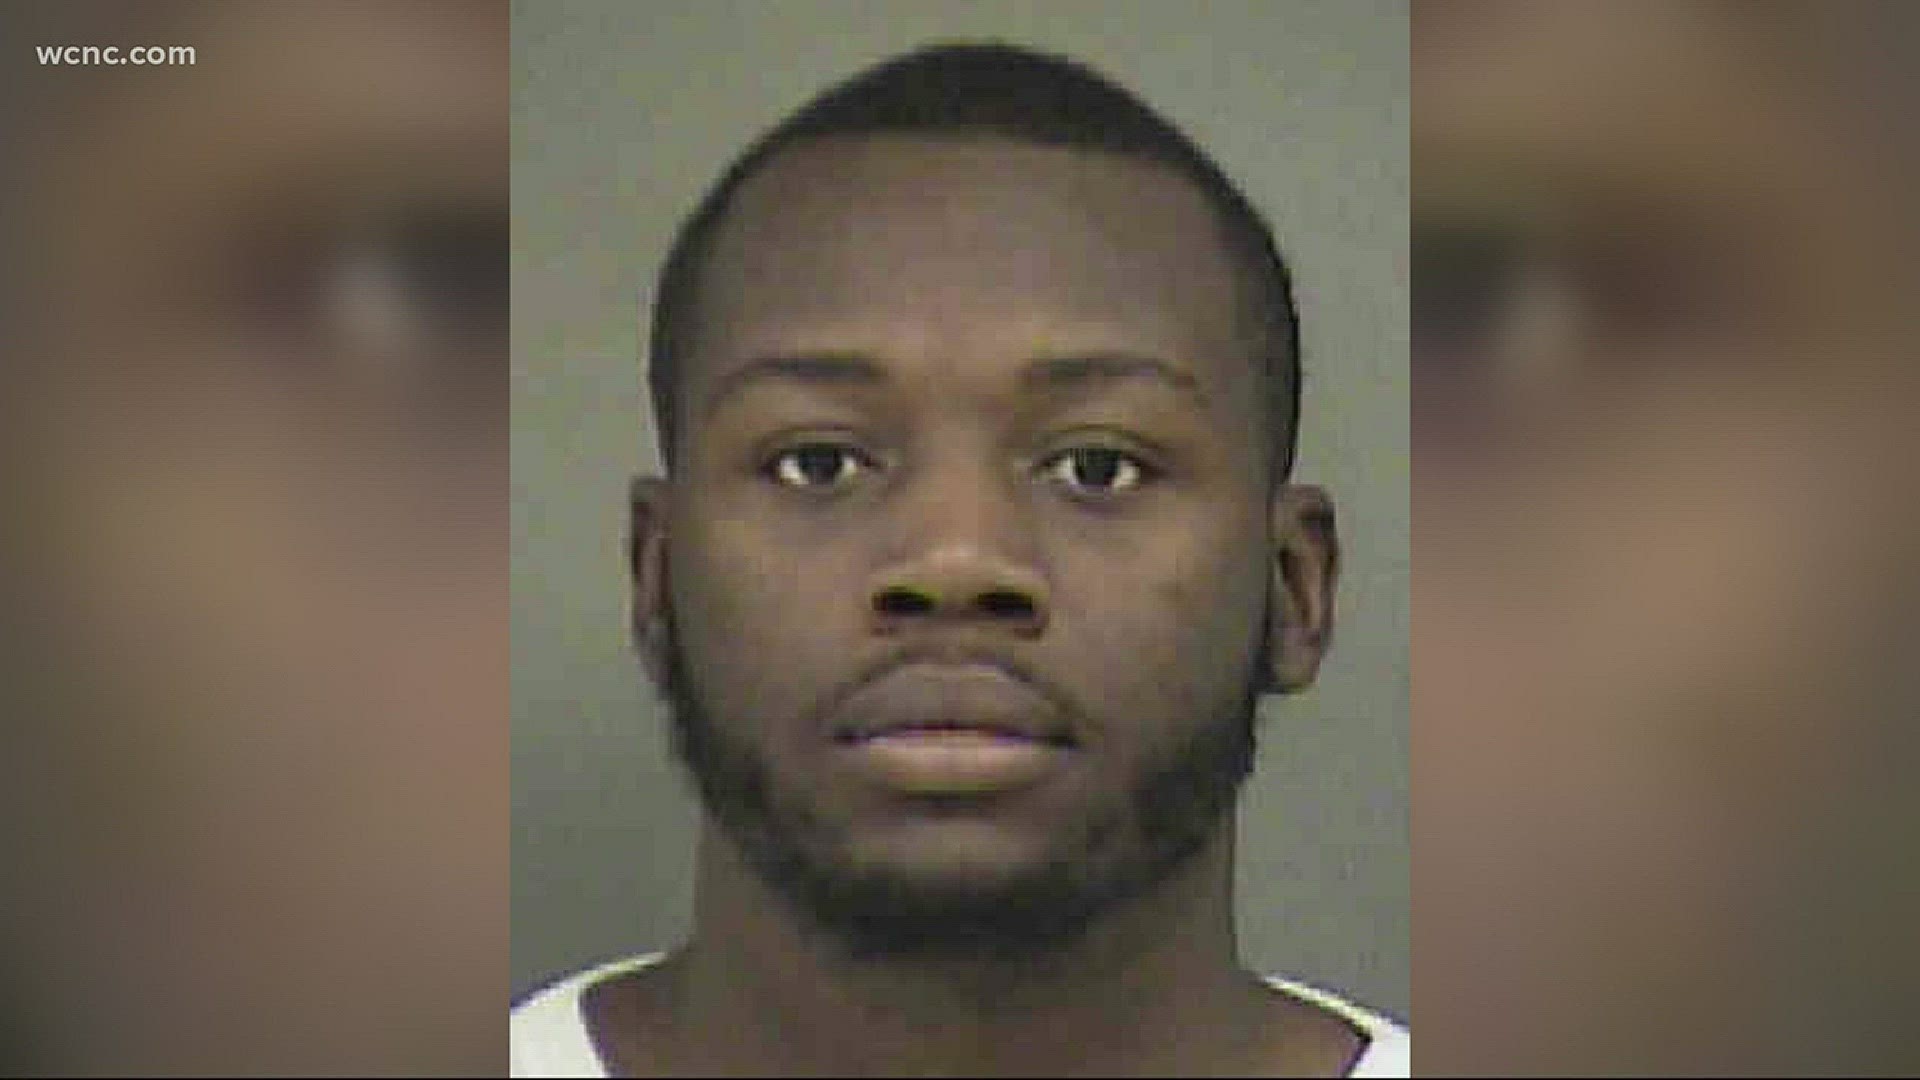 A second man has been charged in connection with the shooting death of a 25-year-old man in southeast Charlotte last August.